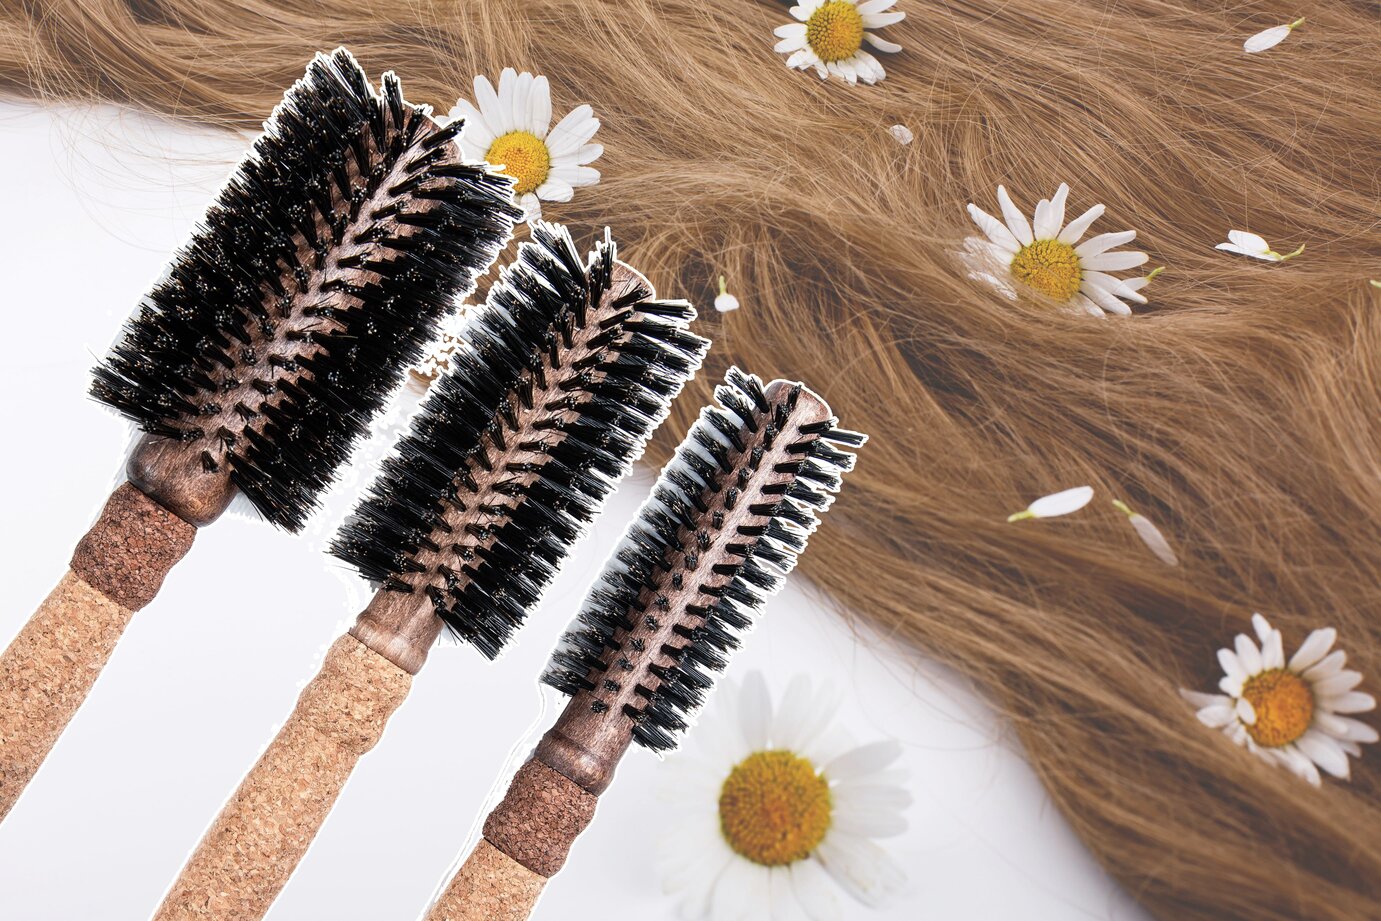 What Is a Boar Bristle Brush?